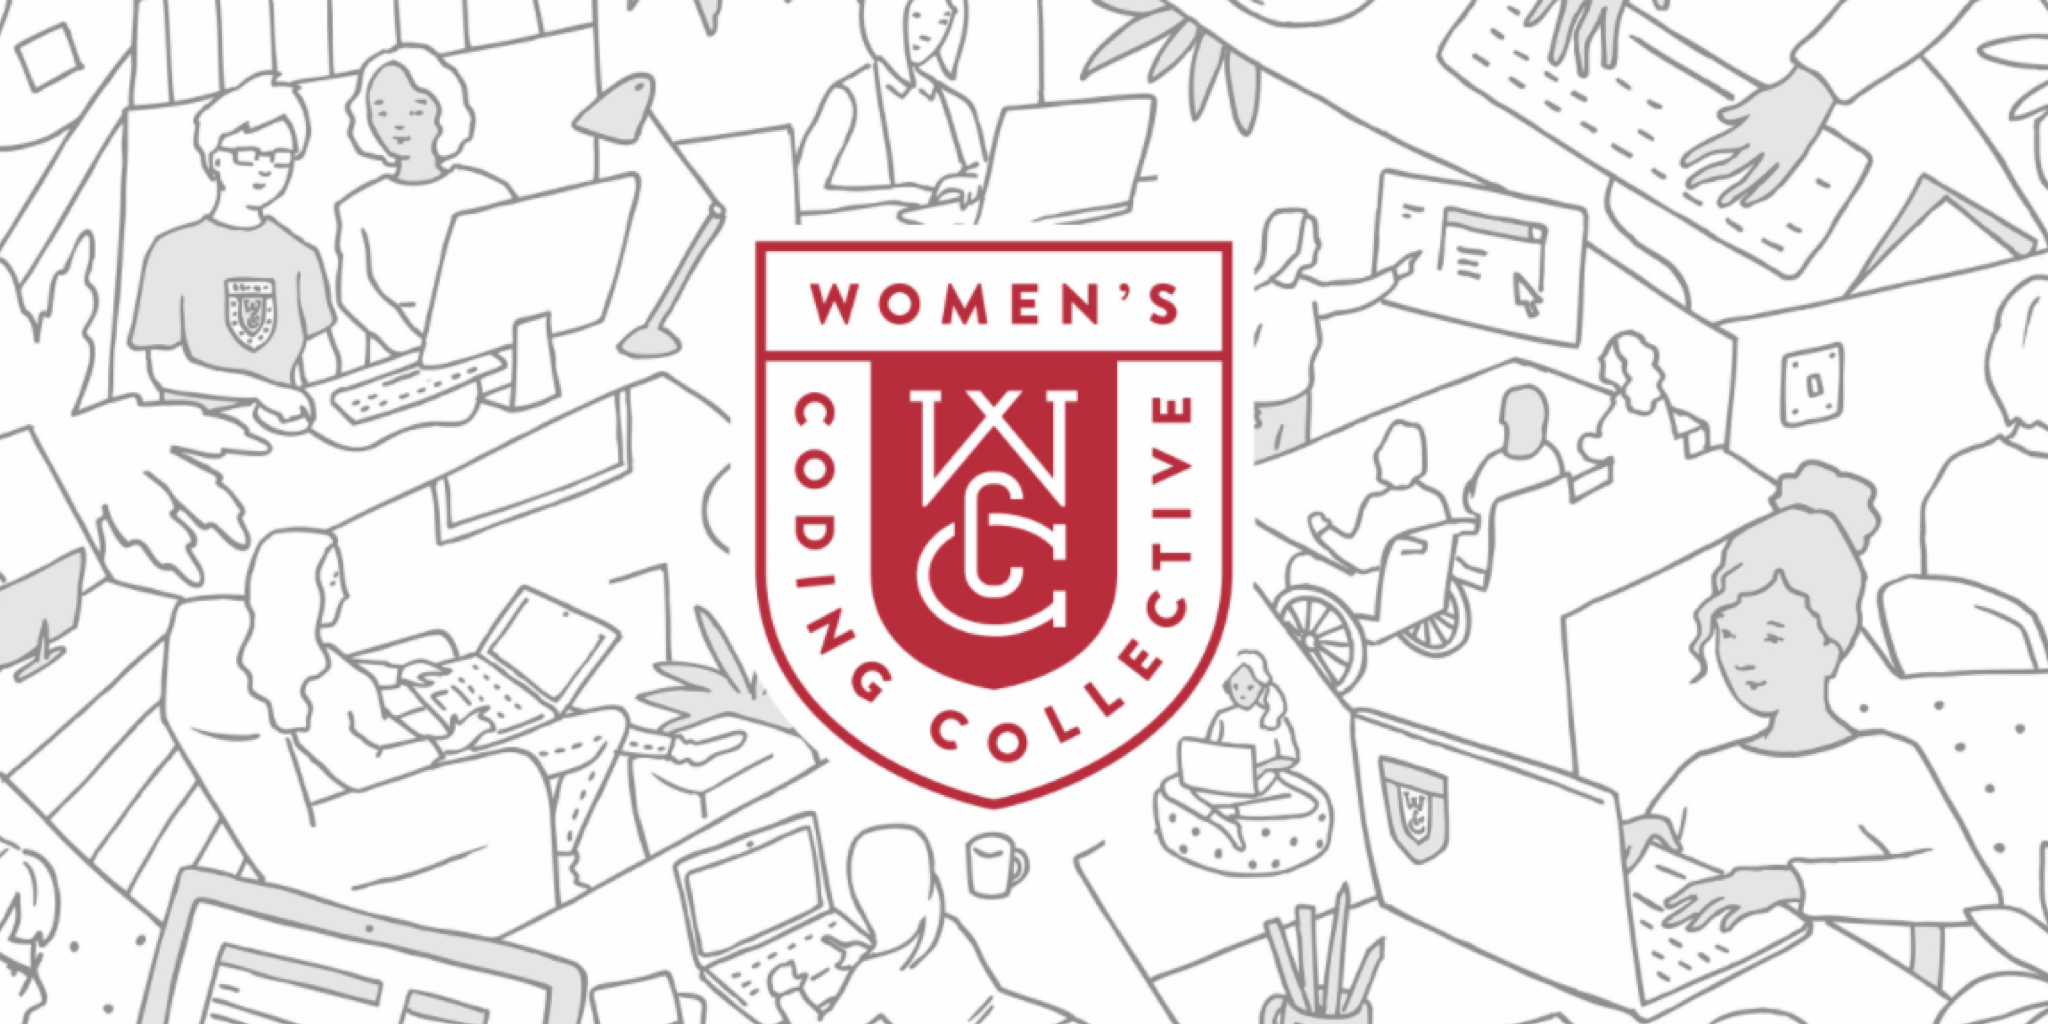 women's coding collective